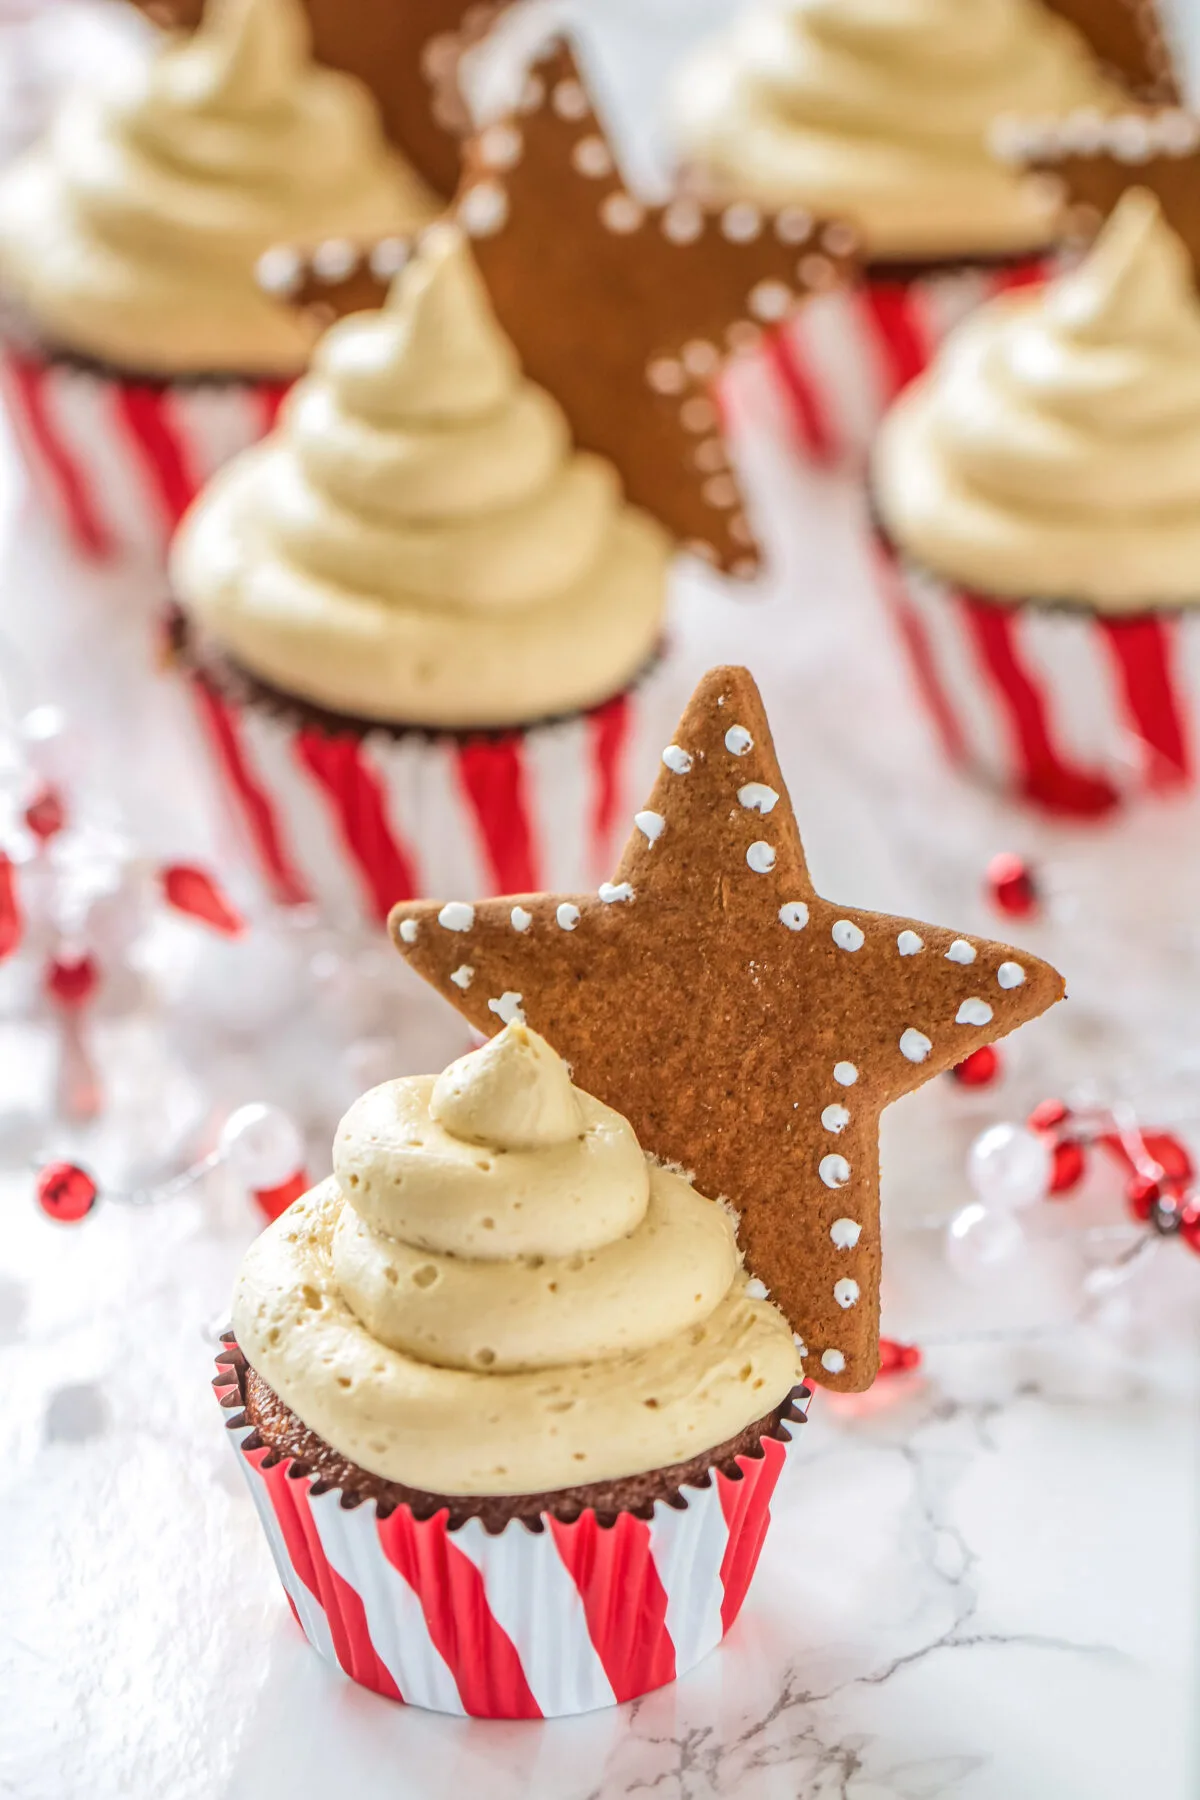 Make delicious homemade gingerbread cupcakes with a fluffy gingerbread buttercream frosting topped with fresh ginger bread cookies.